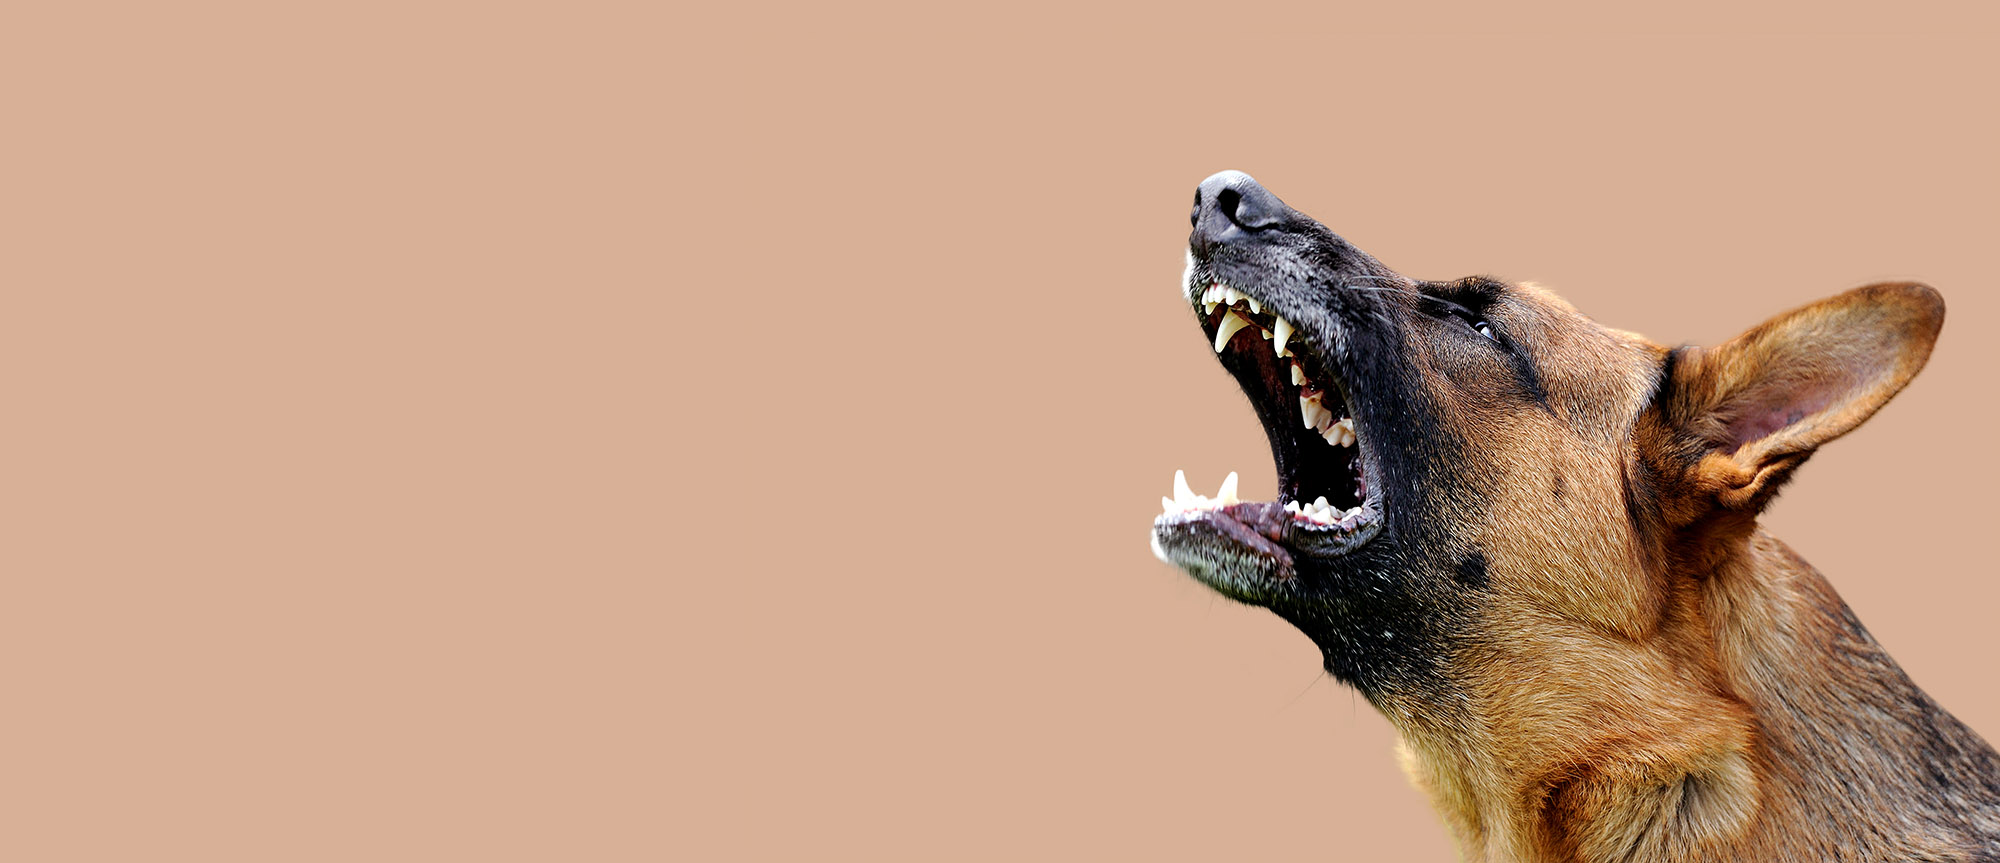 dangerous dog bite attack personal injury solicitors Cardiff